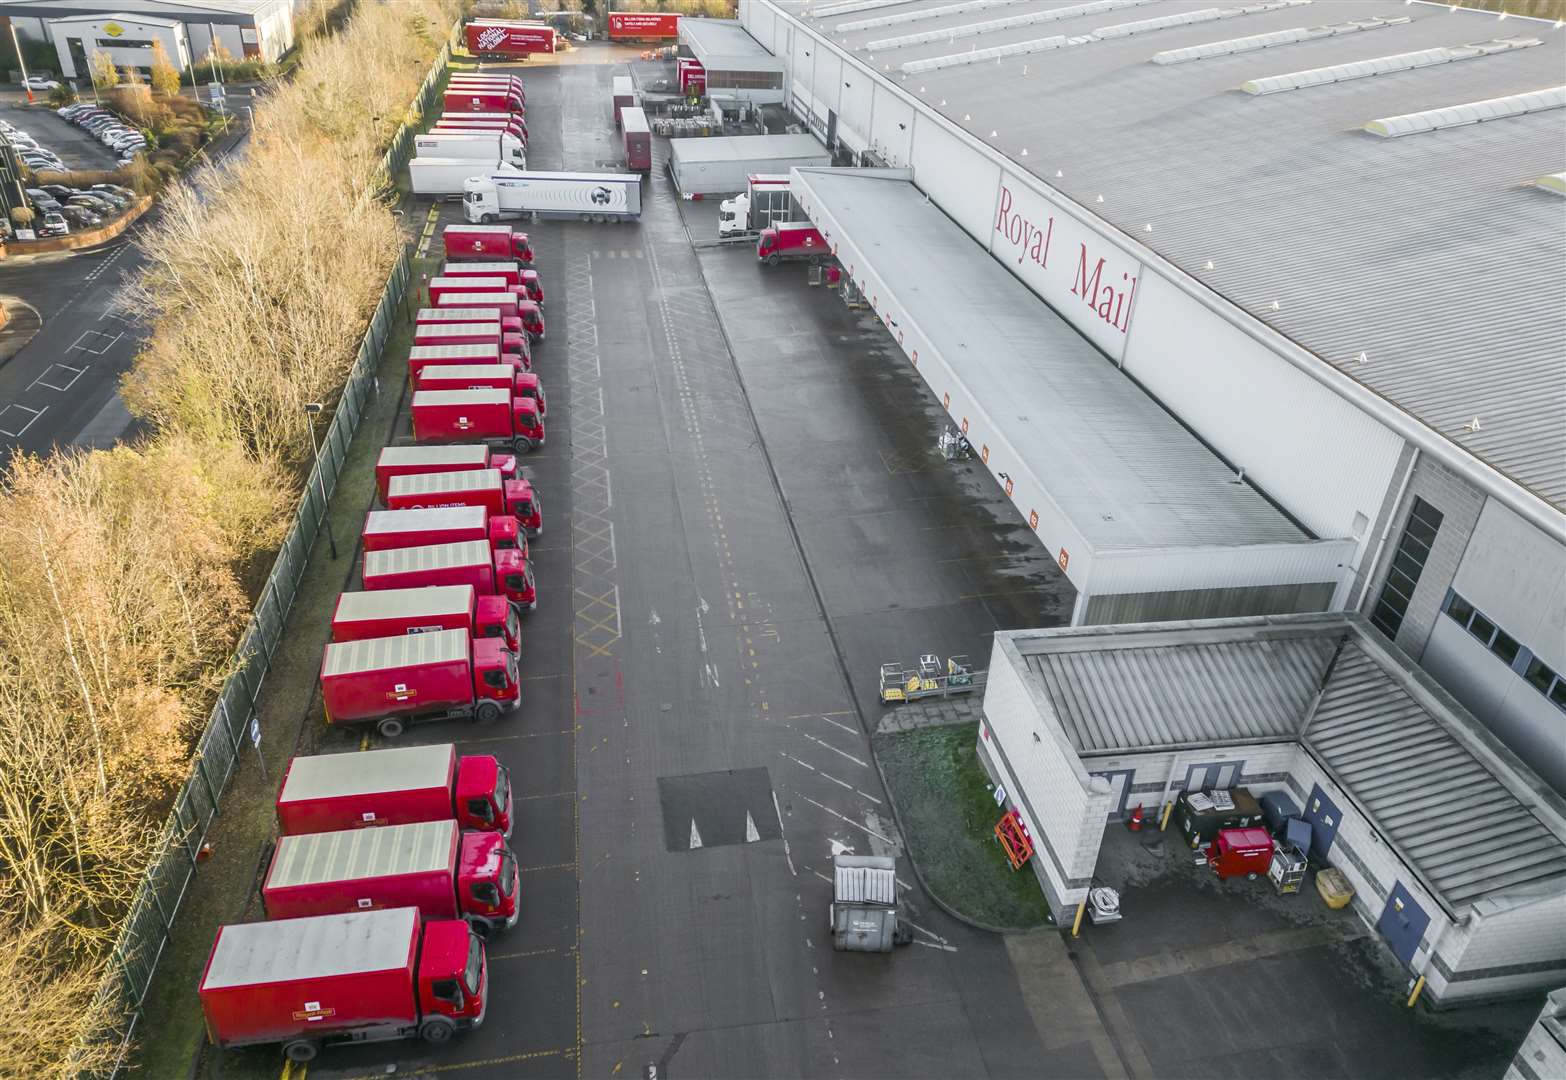 Royal Mail vehicles at Leeds Mail Centre during a strike in December (PA)